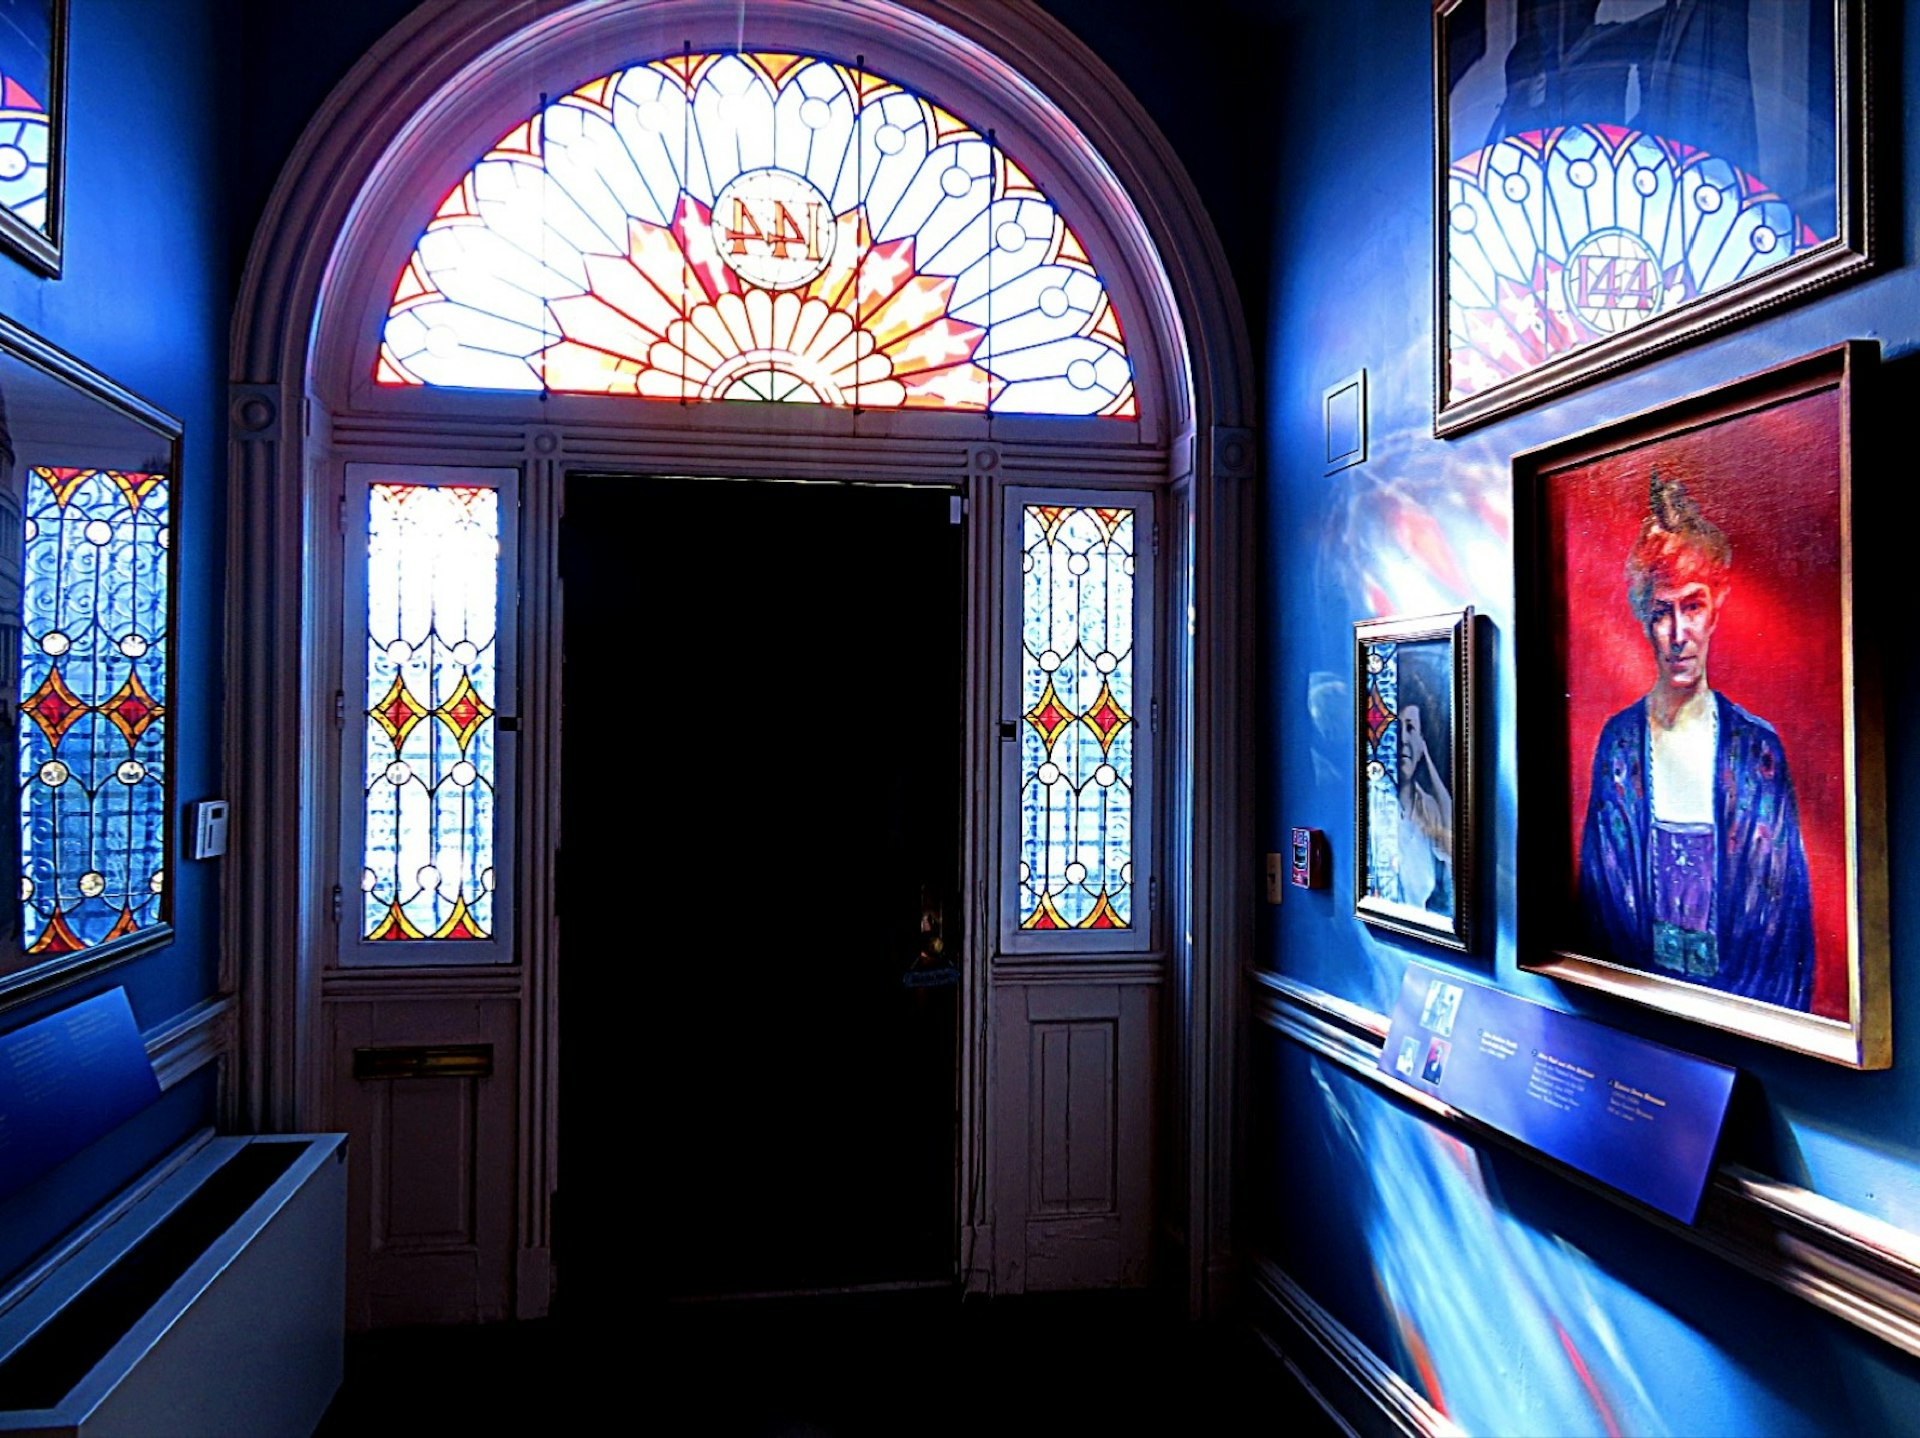 Sunlight streams through stained glass windows into a dark foyer with artwork celebrating women